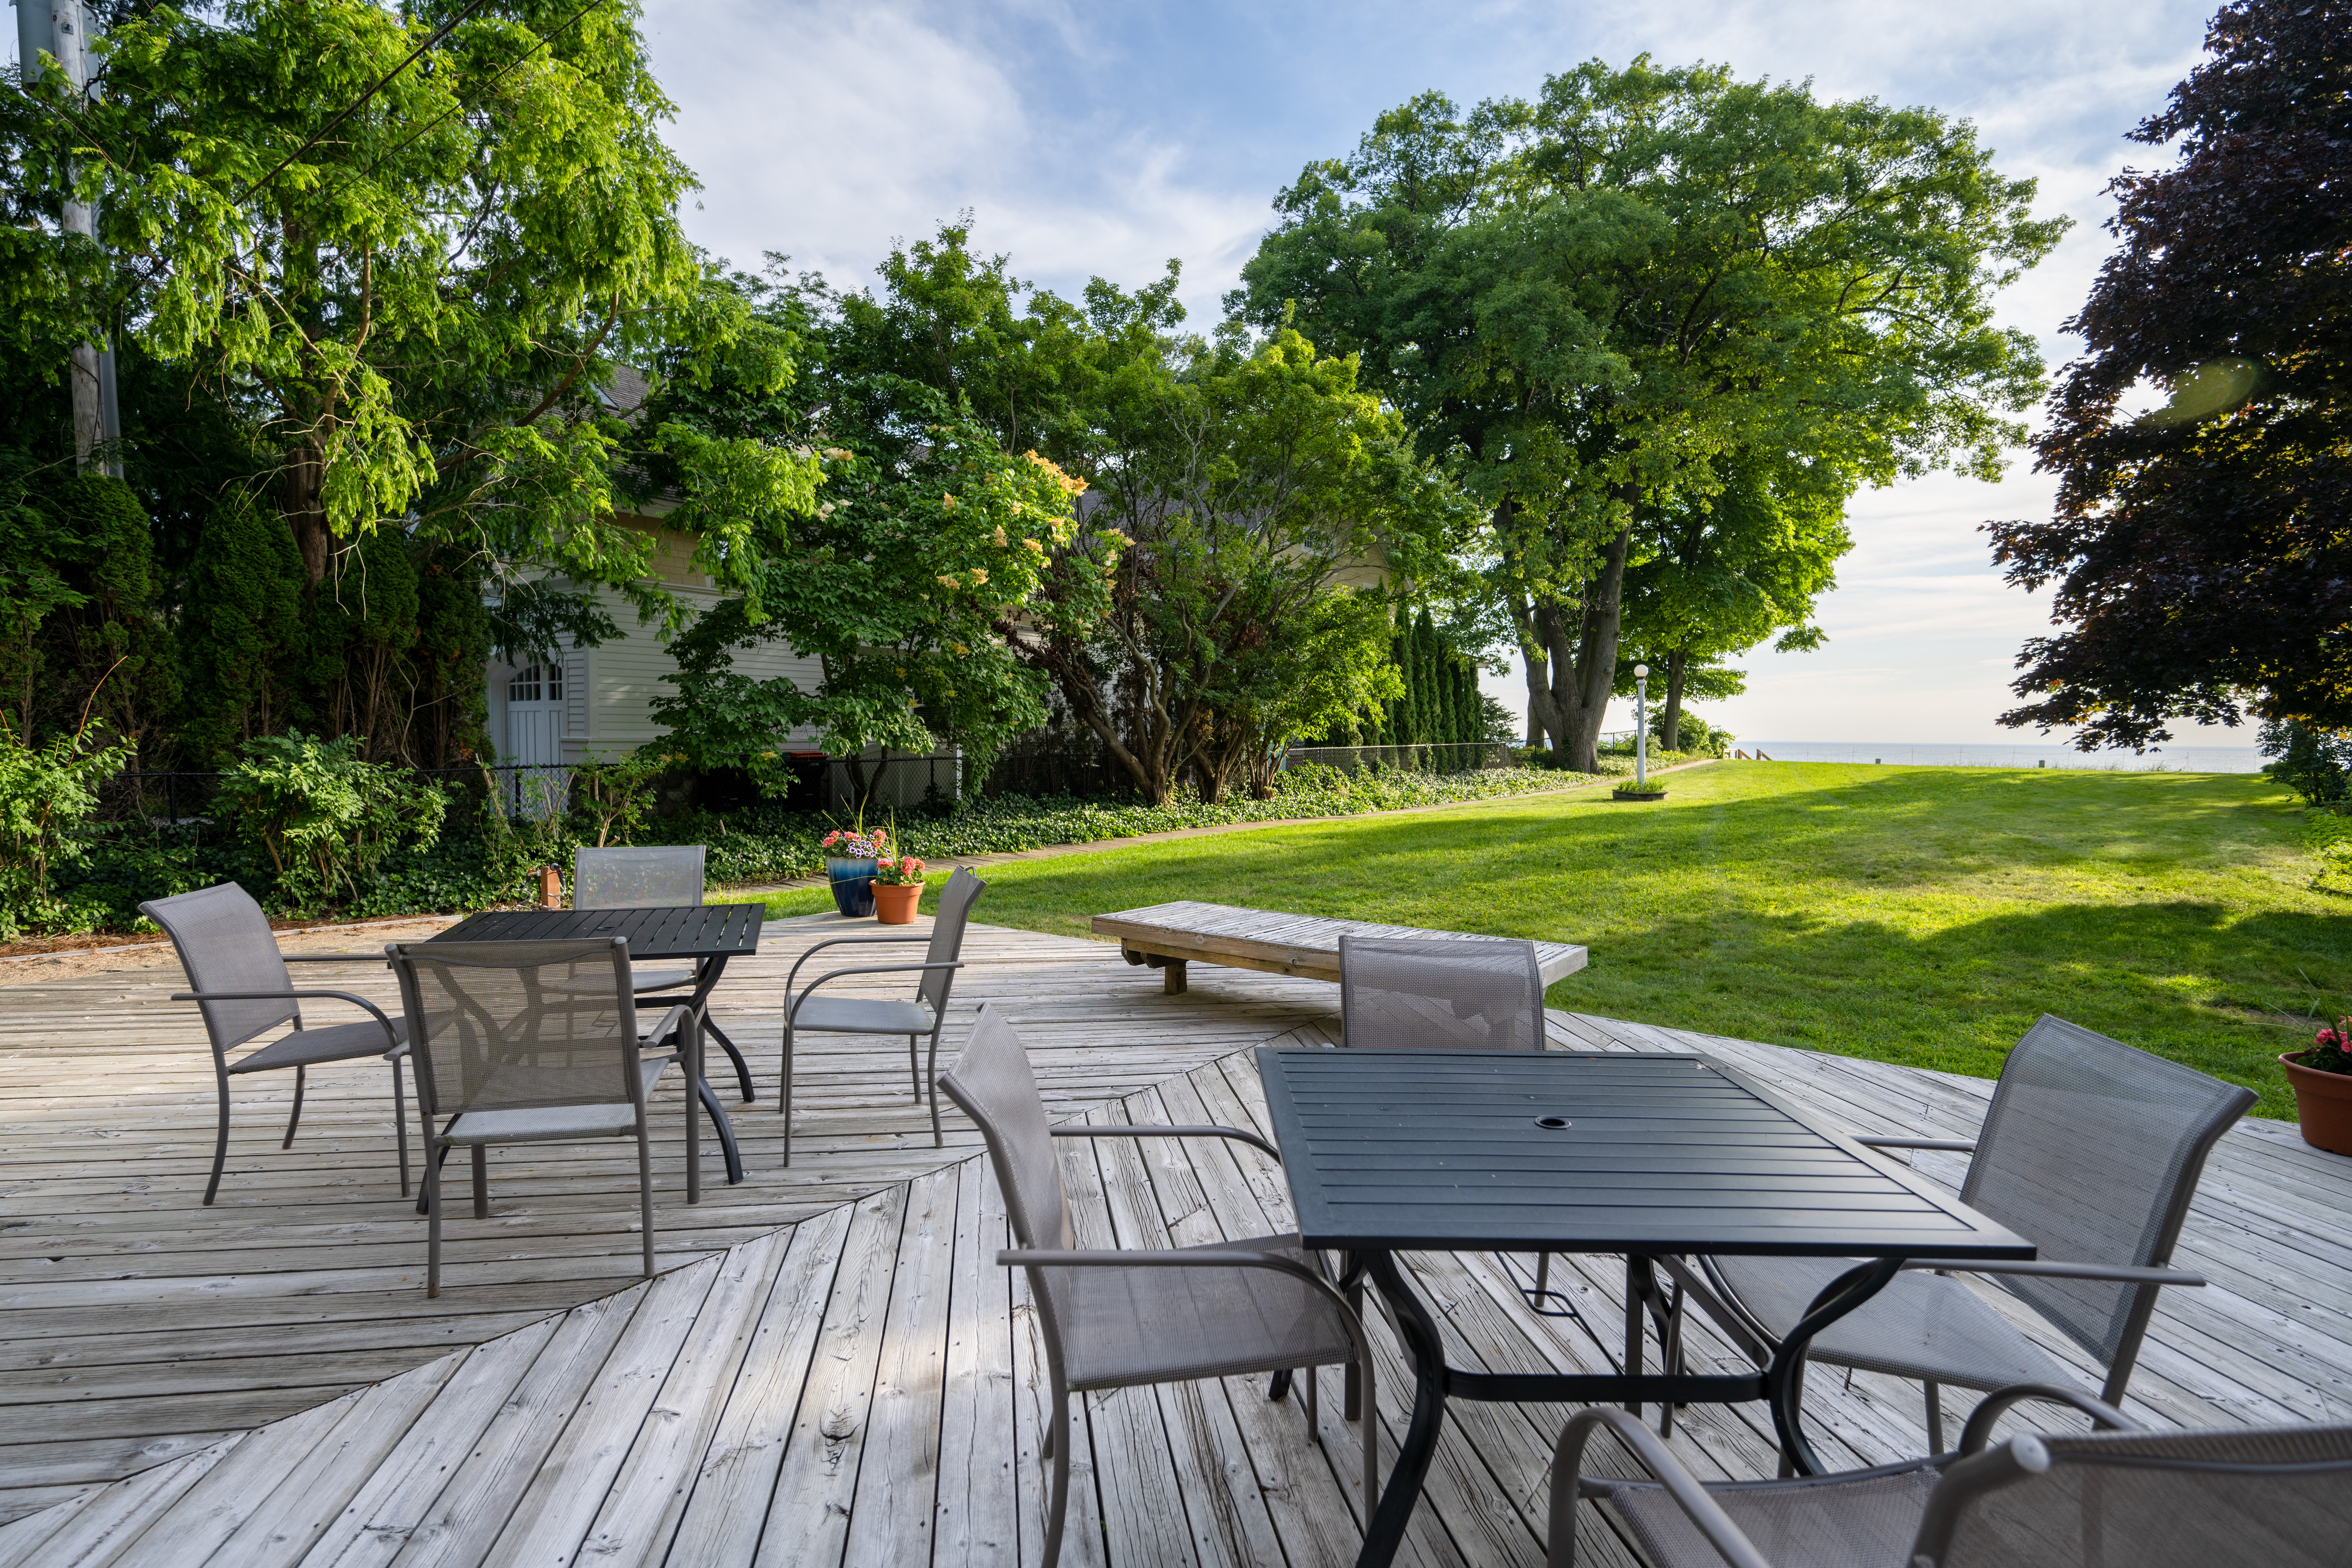 This is a perfect location to enjoy a quiet day overlooking Lake Michigan.